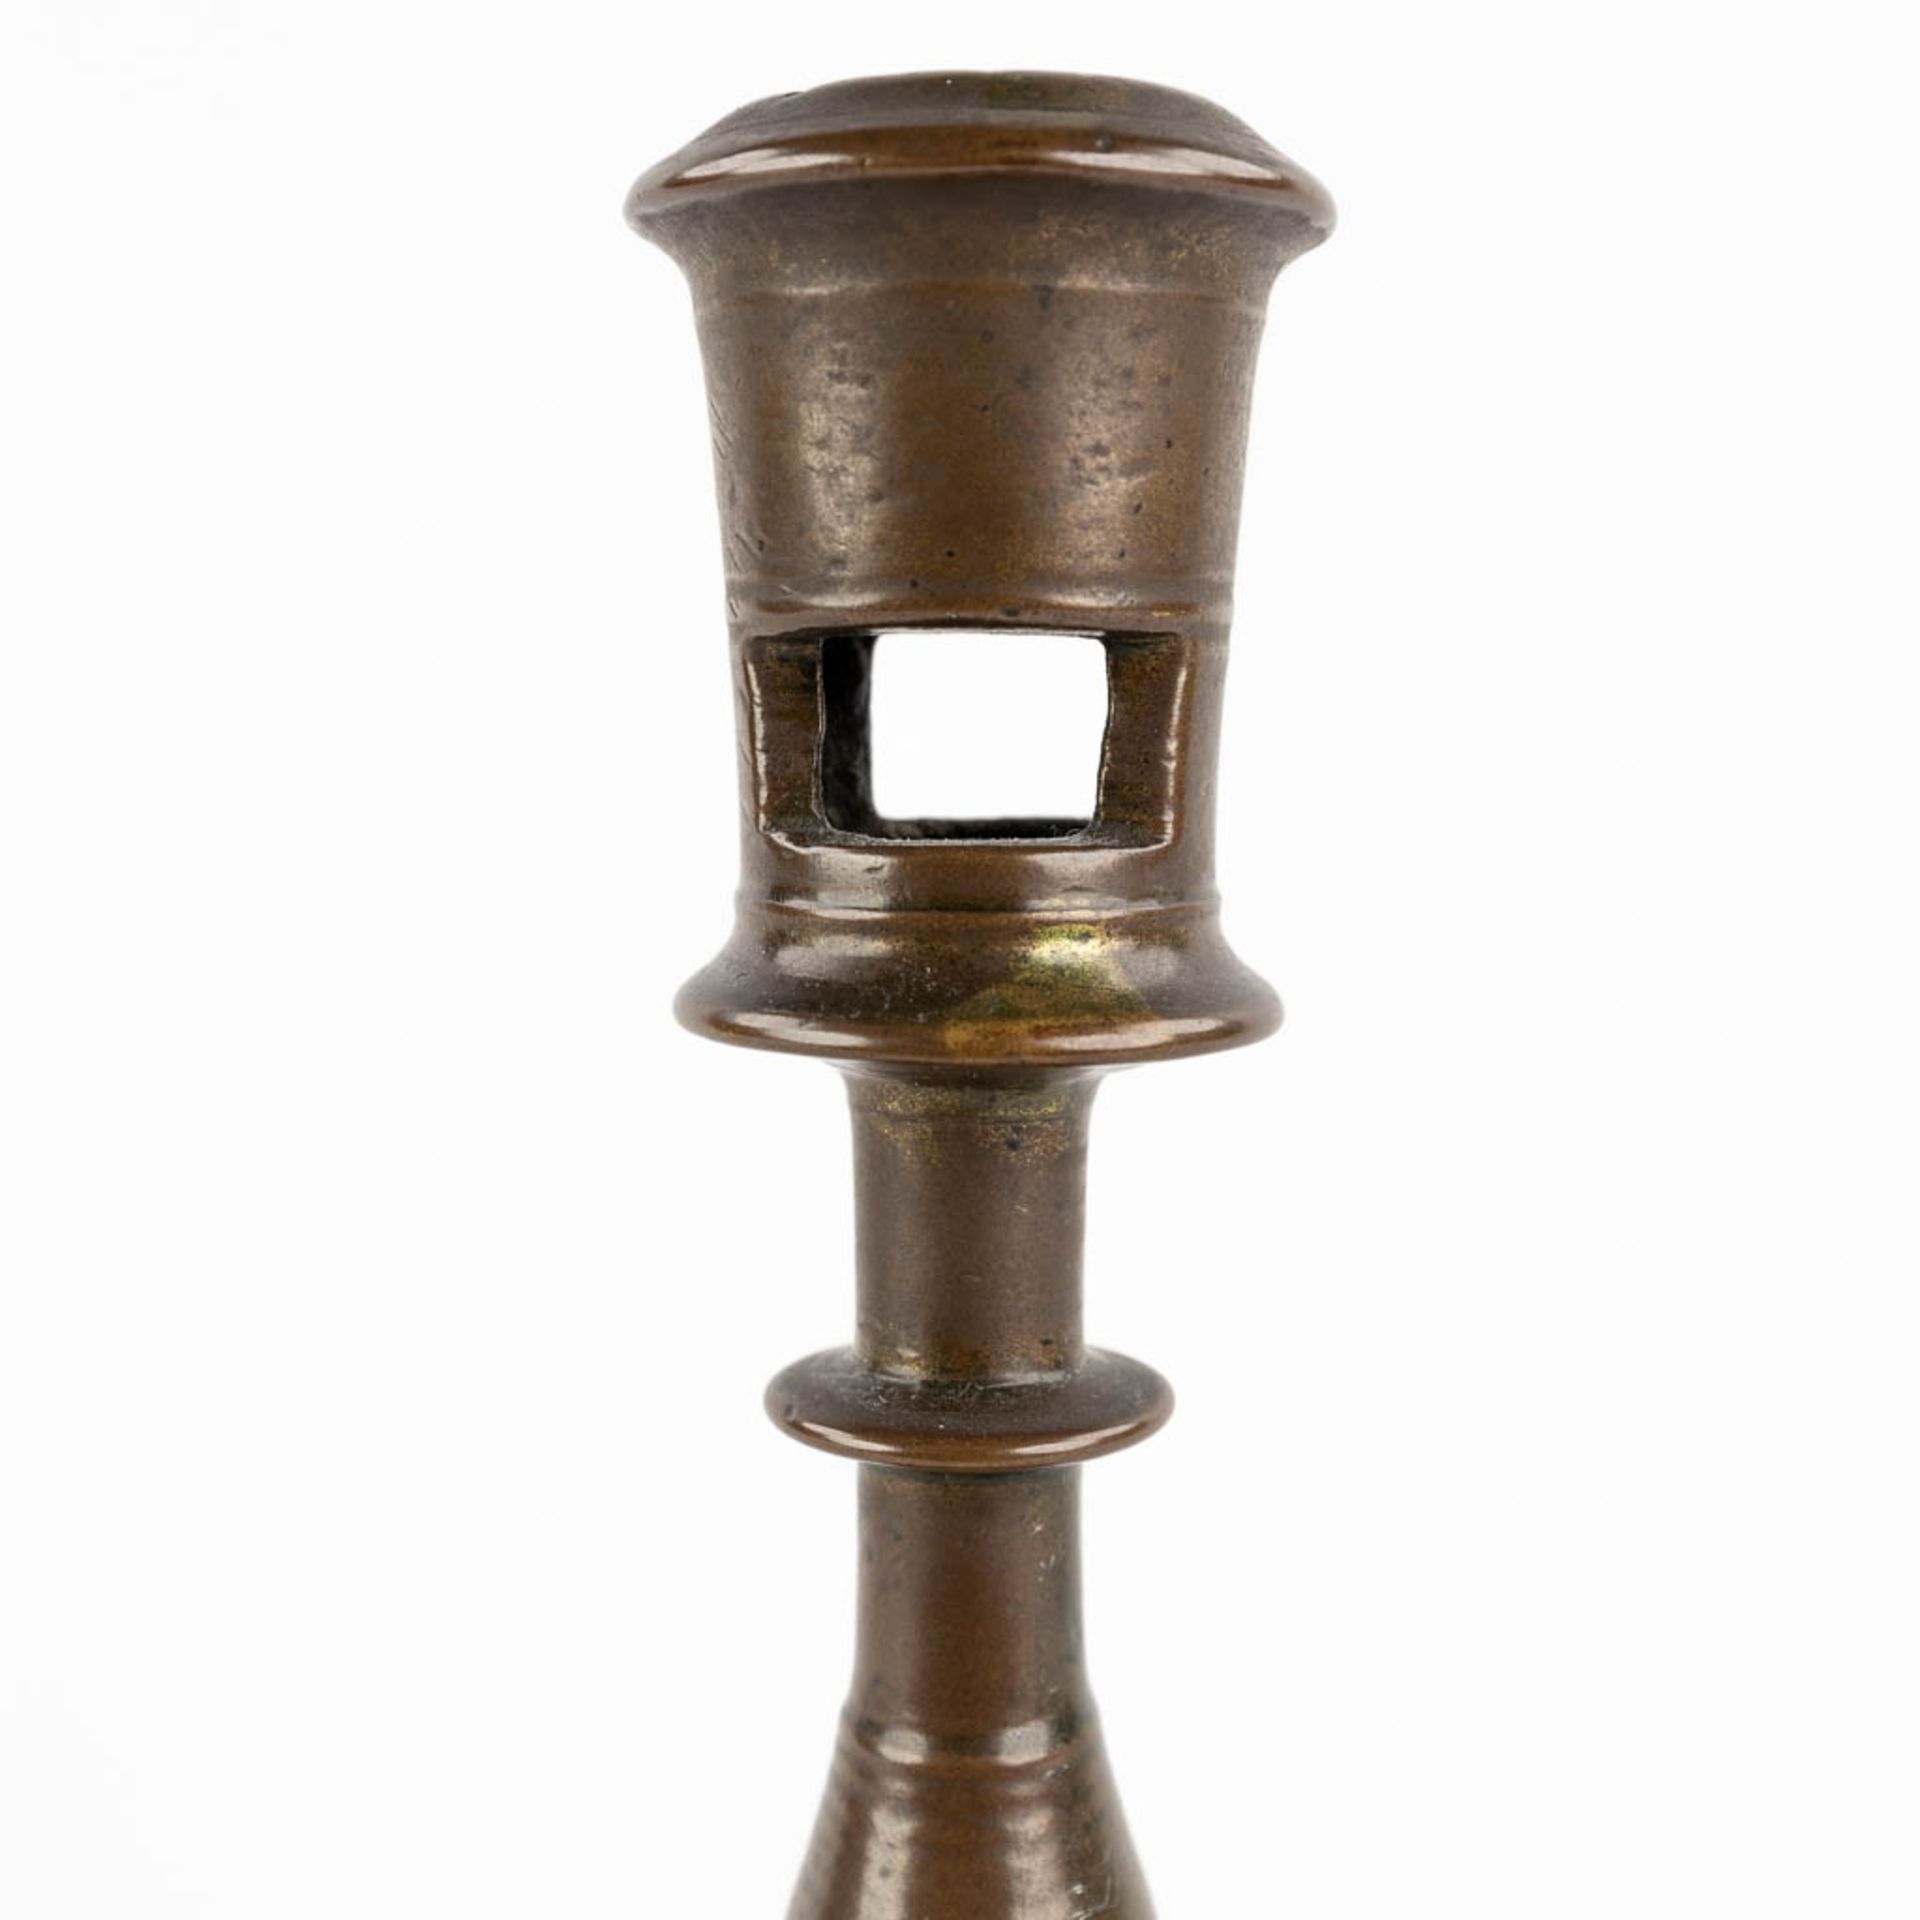 An antique candlestick, Flanders or The Netherlands, 16th C. (H:24,5 x D:14,5 cm) - Image 8 of 11